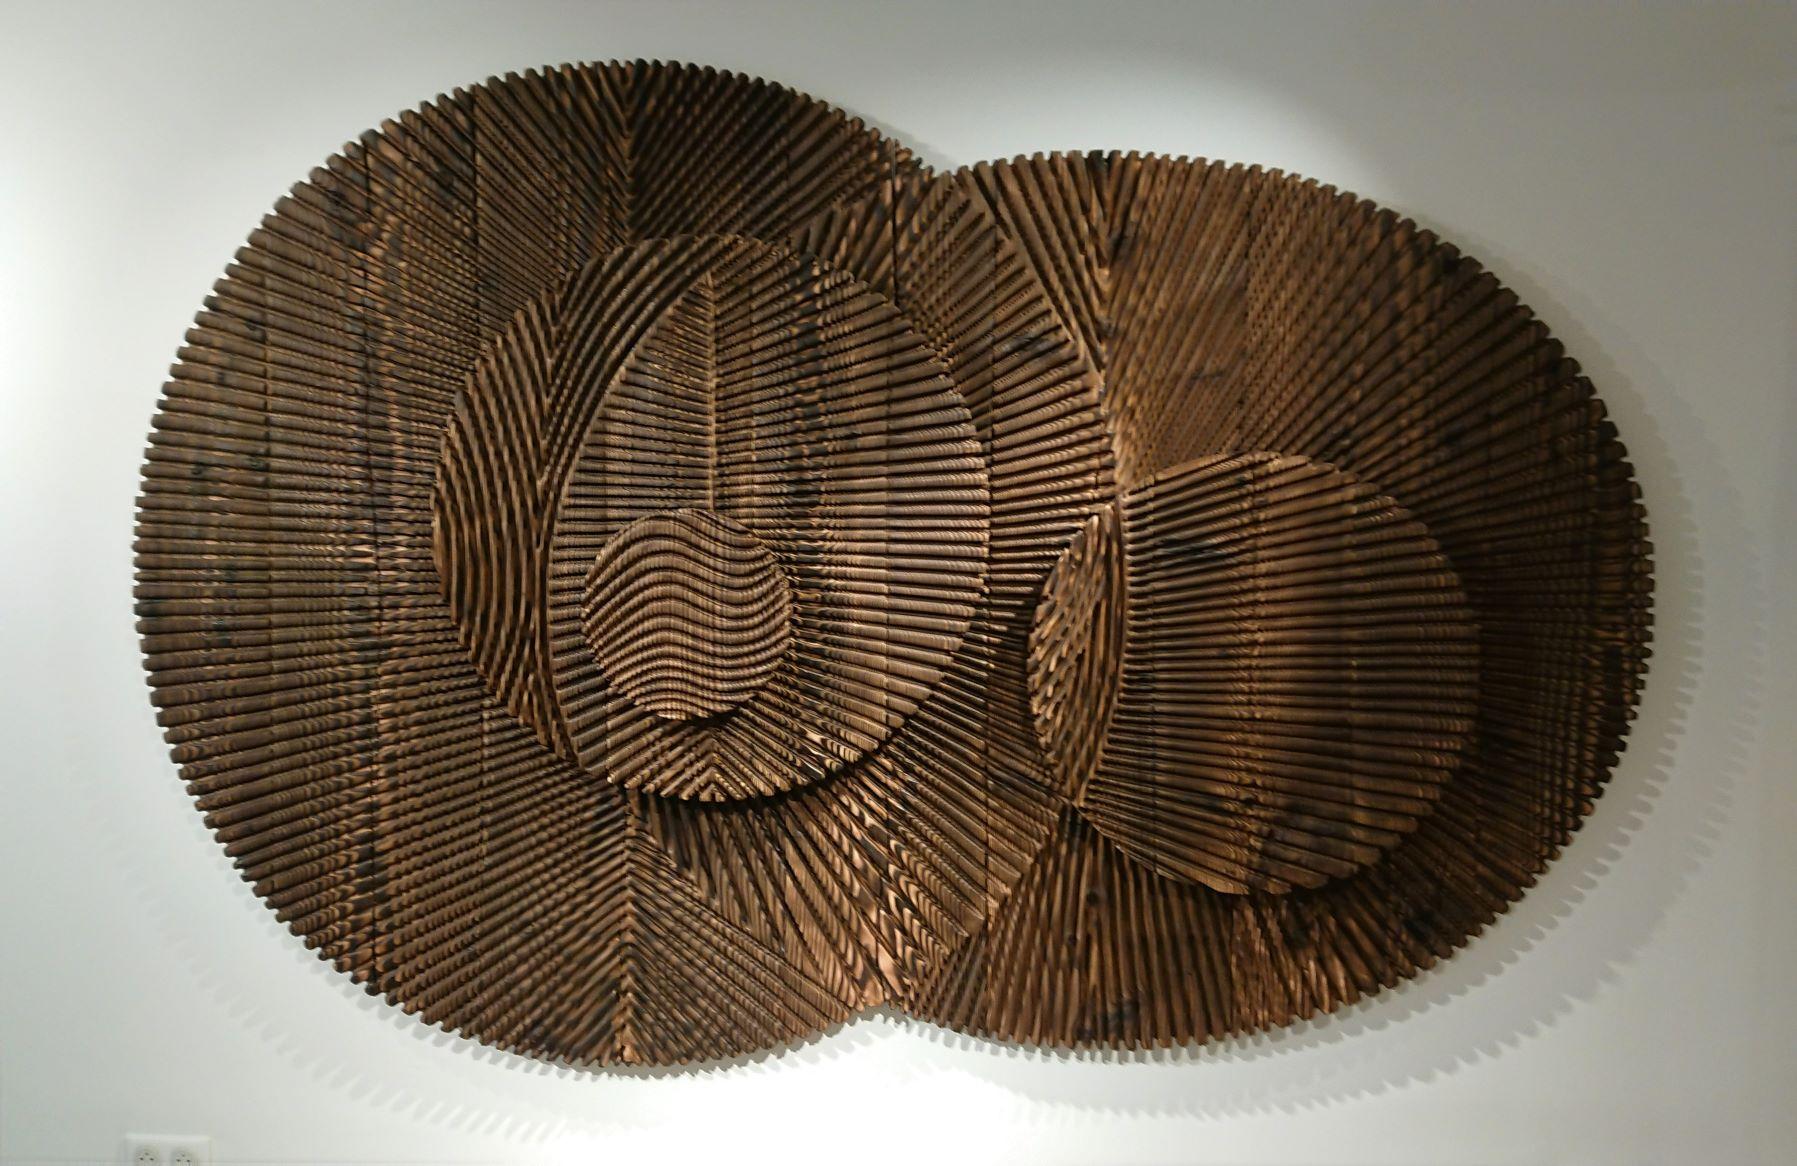 French Sculpted Wood Panel Solstice by Etienne Moyat 2022 France, Douglas-fir wood For Sale